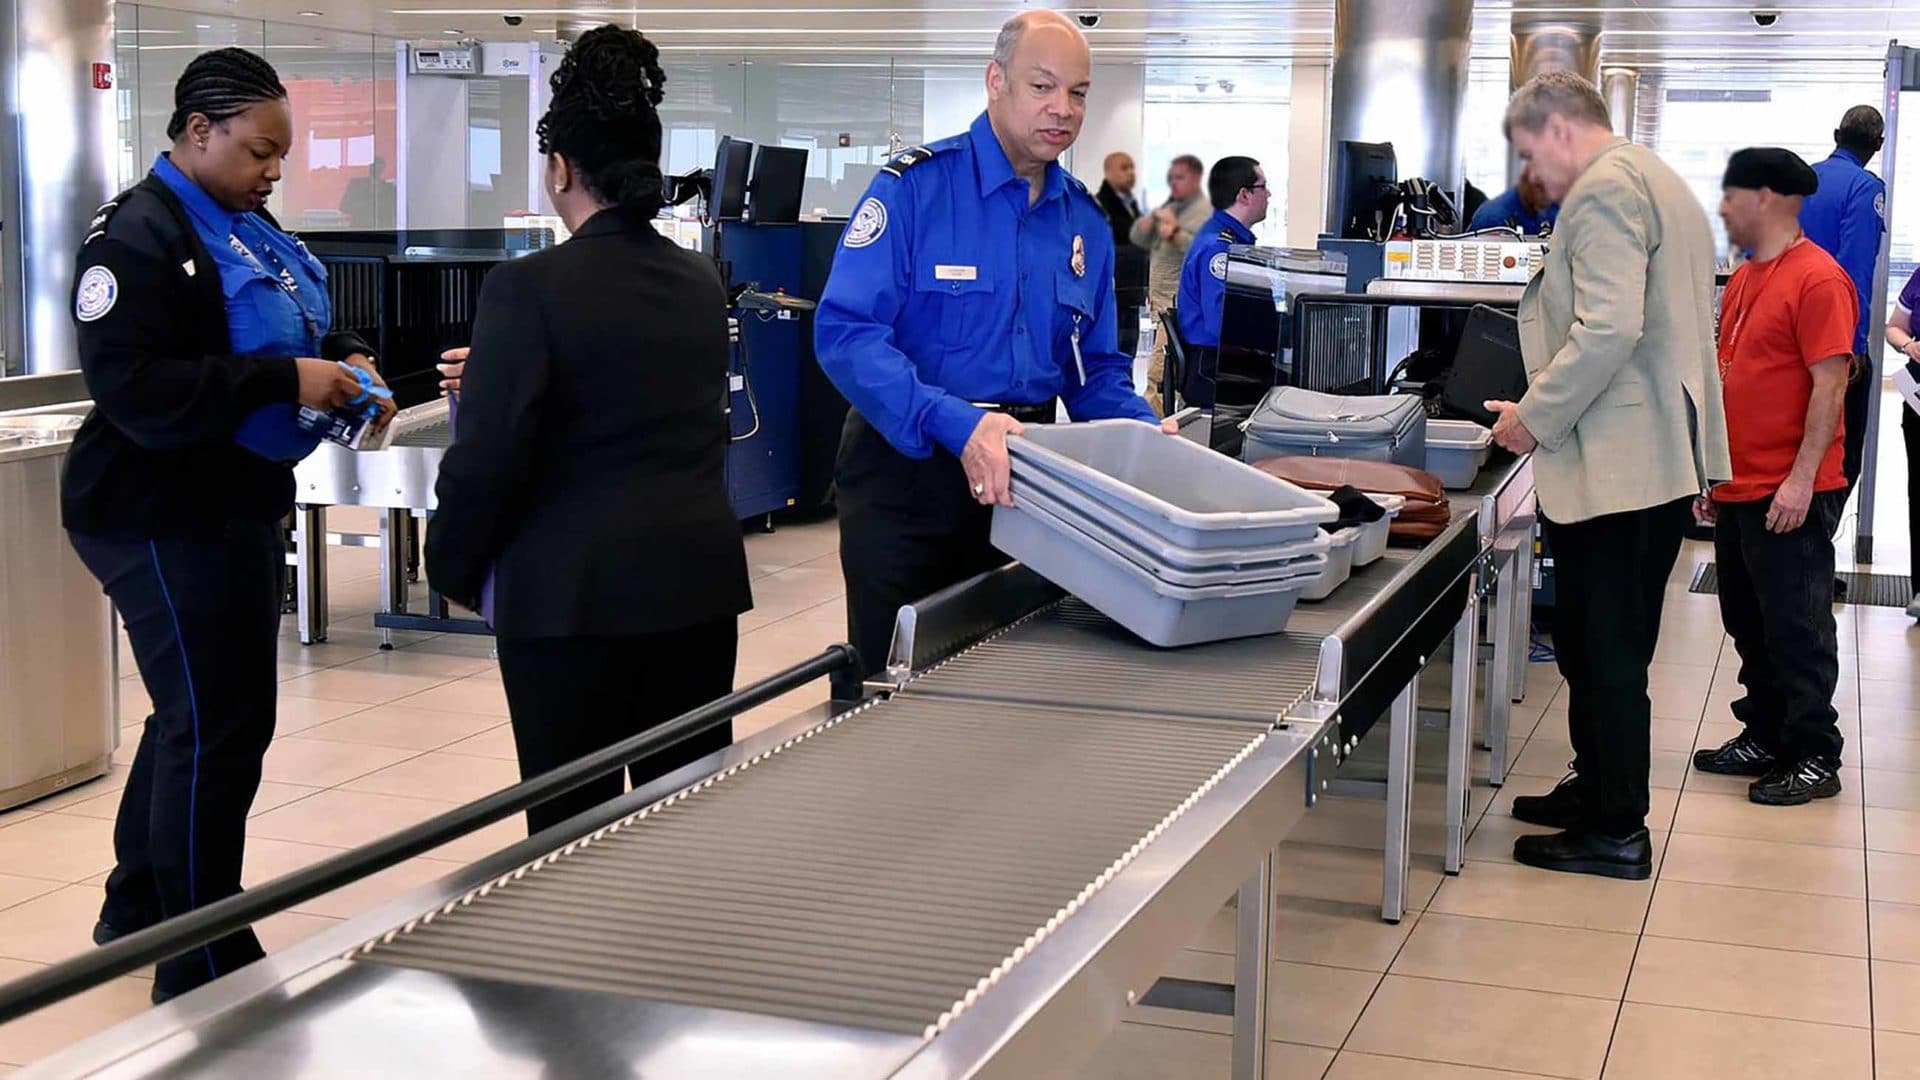 According to a TSA update issued Sunday, airline passengers can now fly with some forms of CBD, the non-psychoactive component of cannabis.